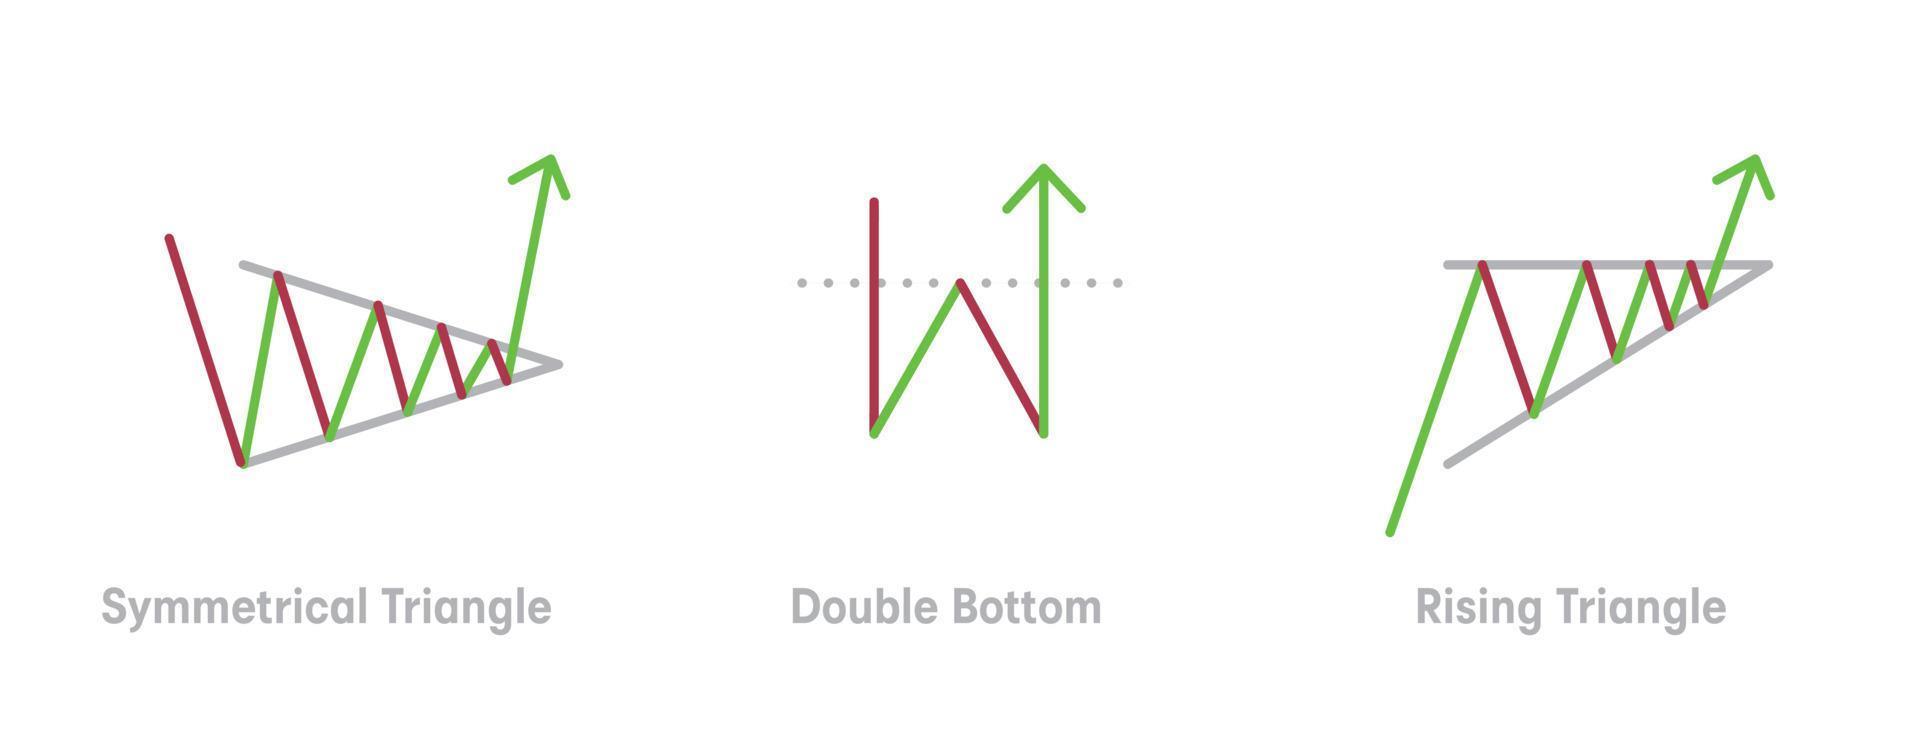 Technical analysis and graphical analysis icon set. These icons are a graphic reading related icon set such as the symmetrical triangle, double bottom, and rising triangle. For web base and education. vector